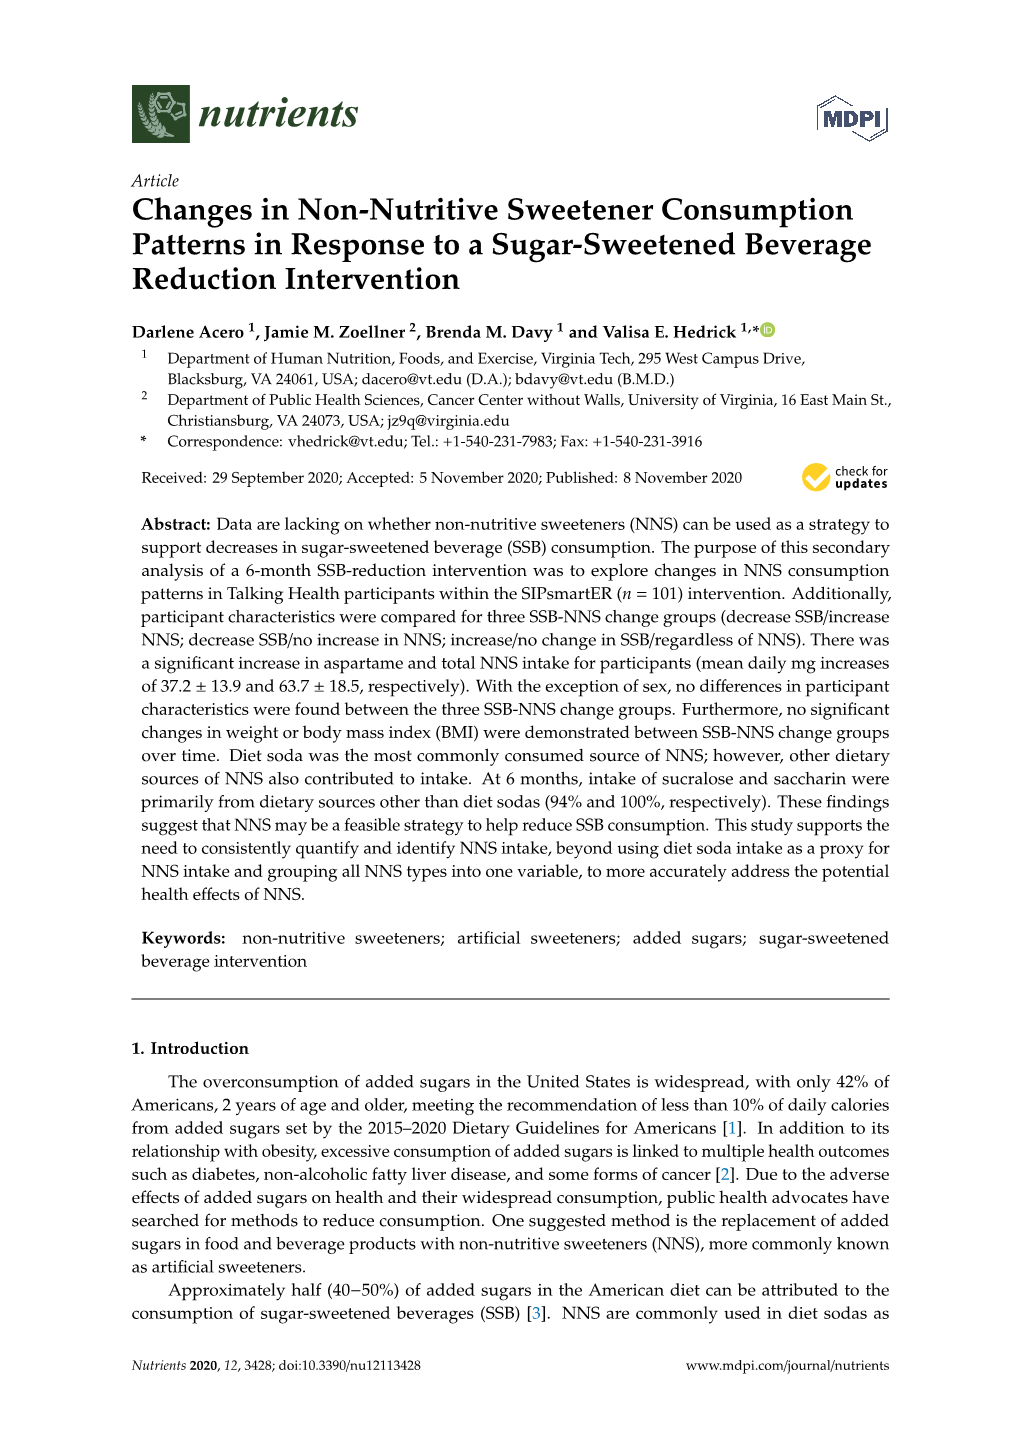 Changes in Non-Nutritive Sweetener Consumption Patterns in Response to a Sugar-Sweetened Beverage Reduction Intervention